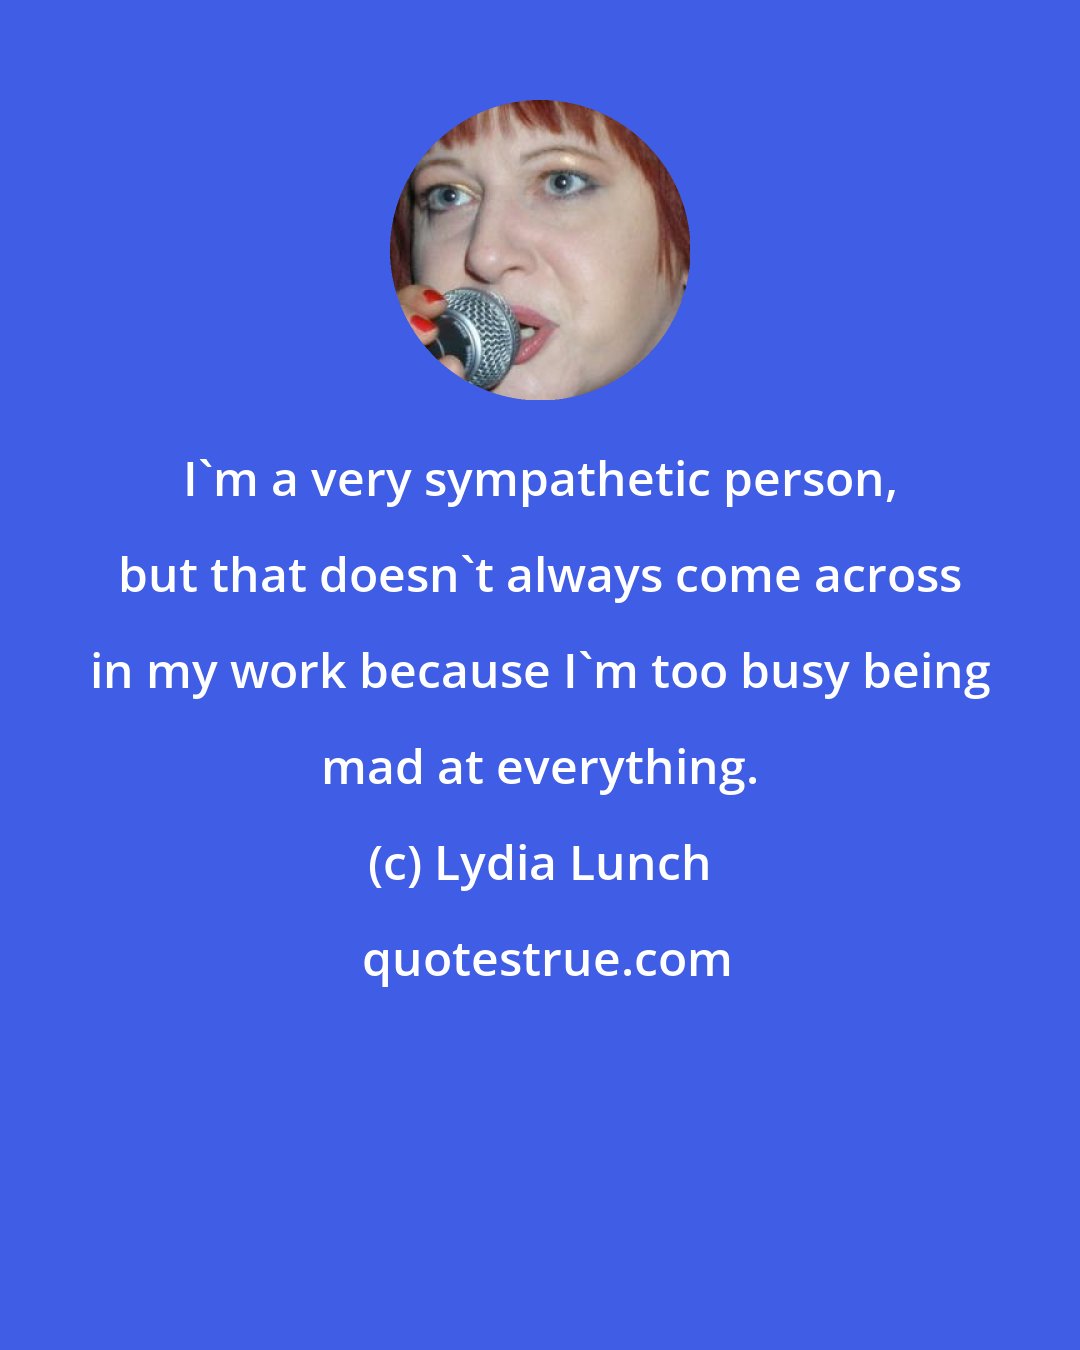 Lydia Lunch: I'm a very sympathetic person, but that doesn't always come across in my work because I'm too busy being mad at everything.